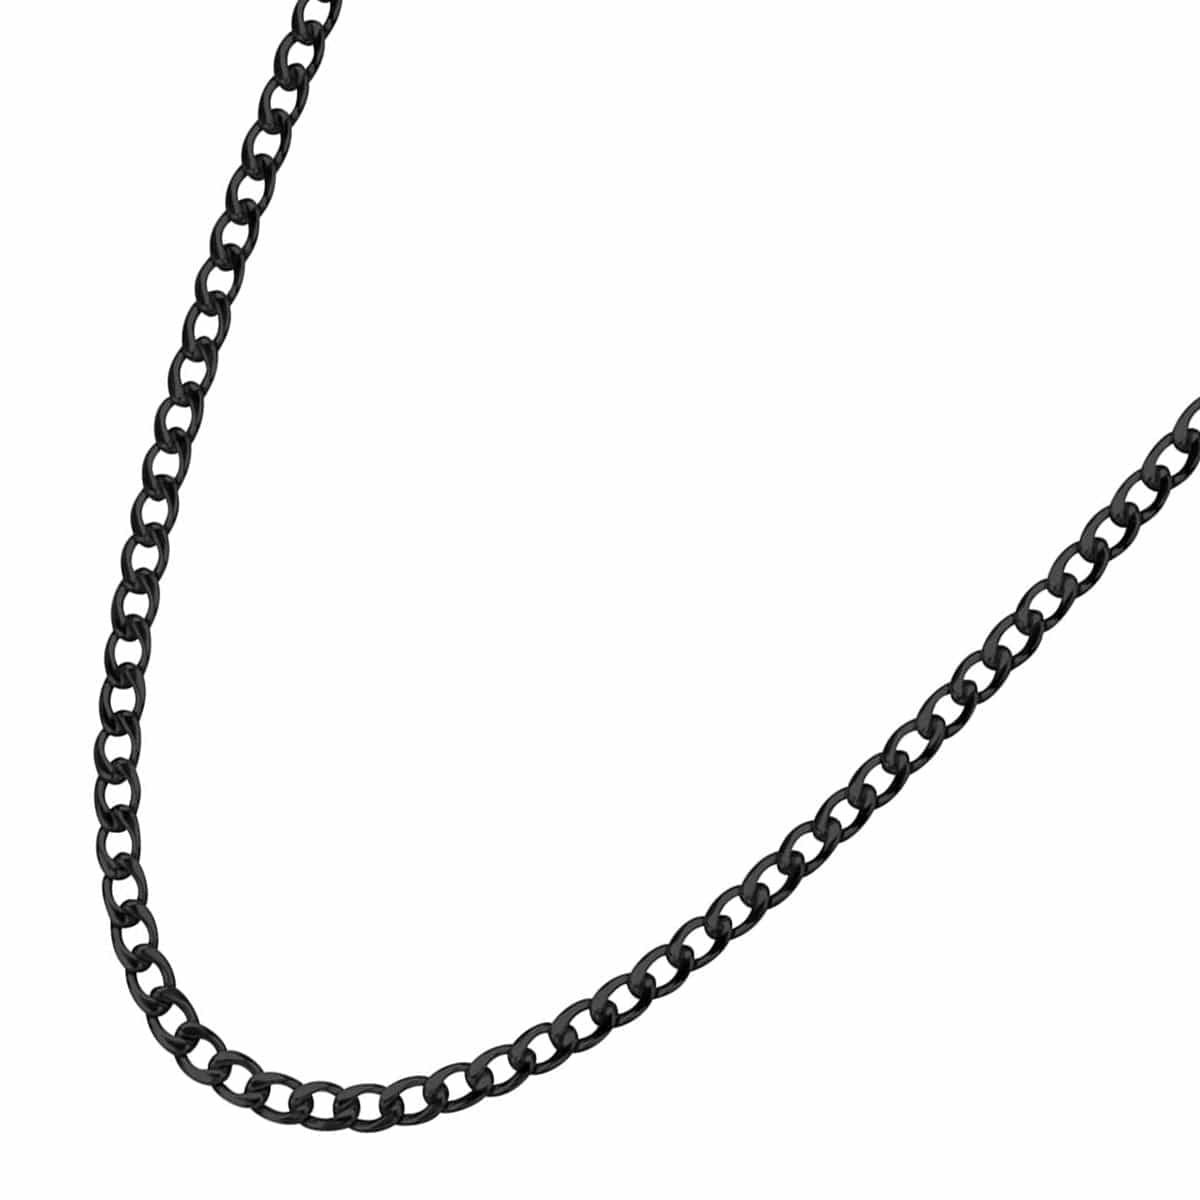 INOX JEWELRY Chains Black Stainless Steel 4.8mm Round Curb Chain